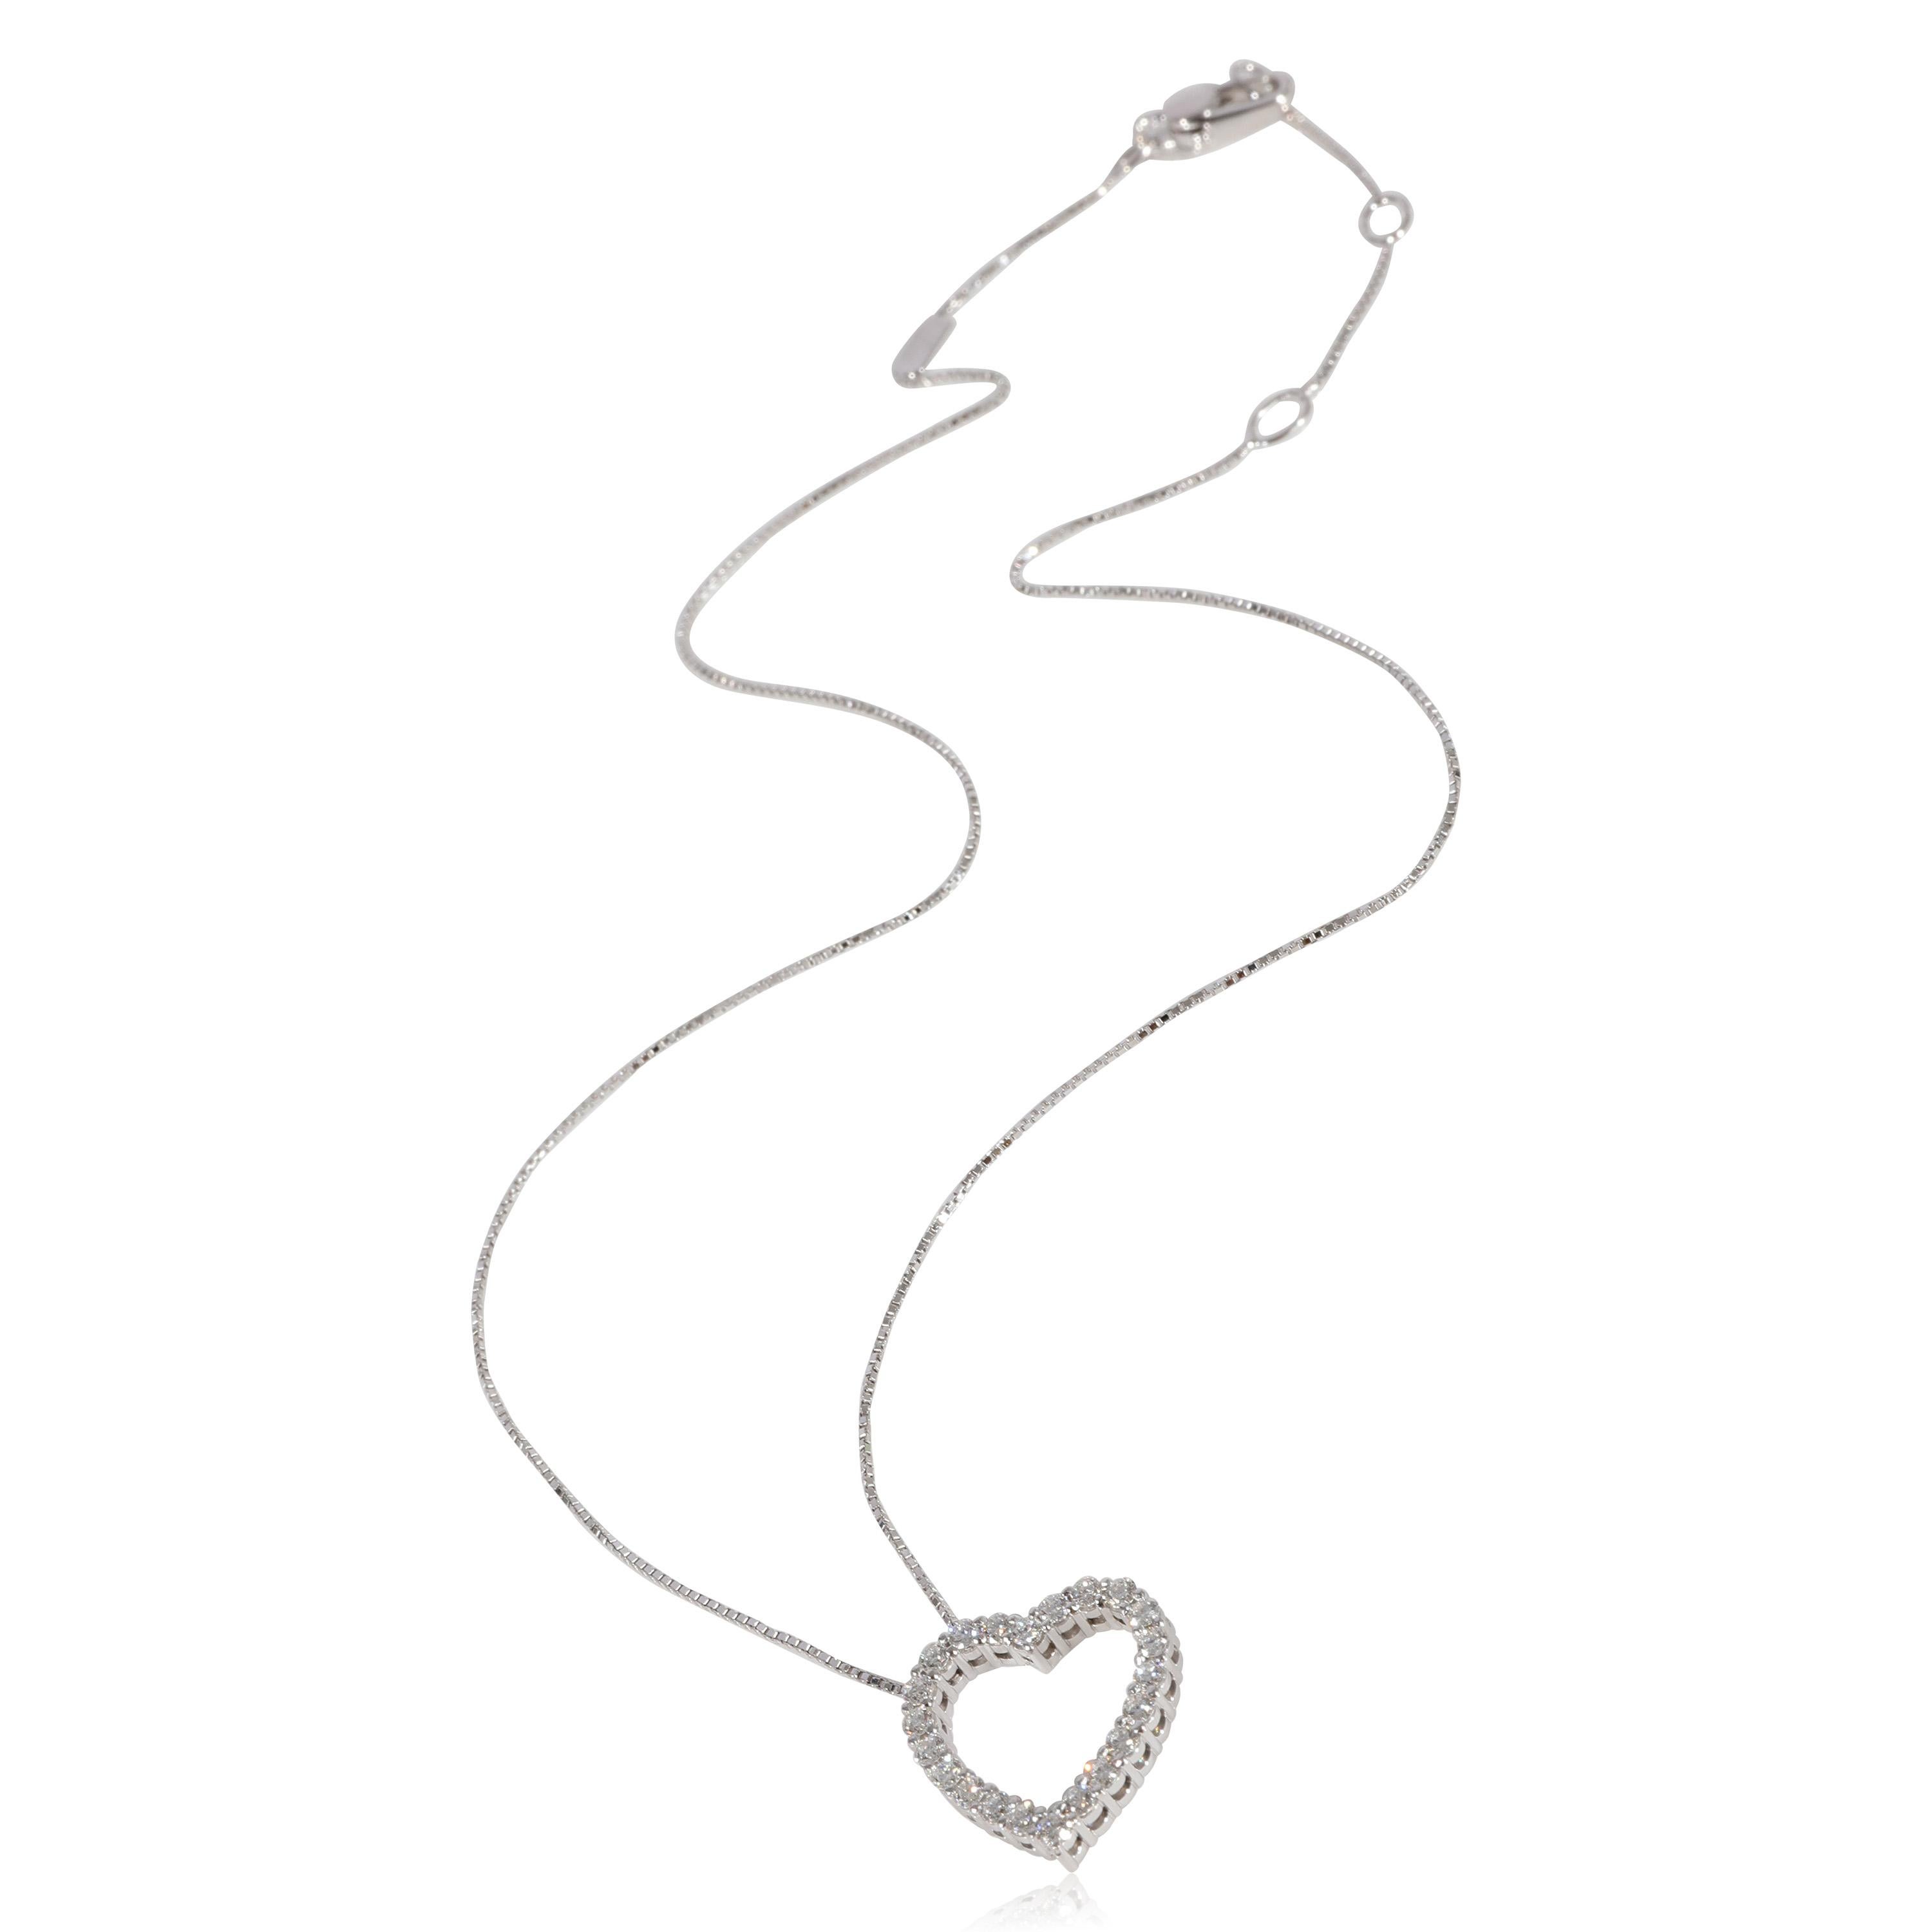 Gucci 2003 Fall/Winter Diamond Heart Pendant in 18k White Gold 0.65 CTW

PRIMARY DETAILS
SKU: 124226
Listing Title: Gucci 2003 Fall/Winter Diamond Heart Pendant in 18k White Gold 0.65 CTW
Condition Description: Retails for 3100 USD. In excellent